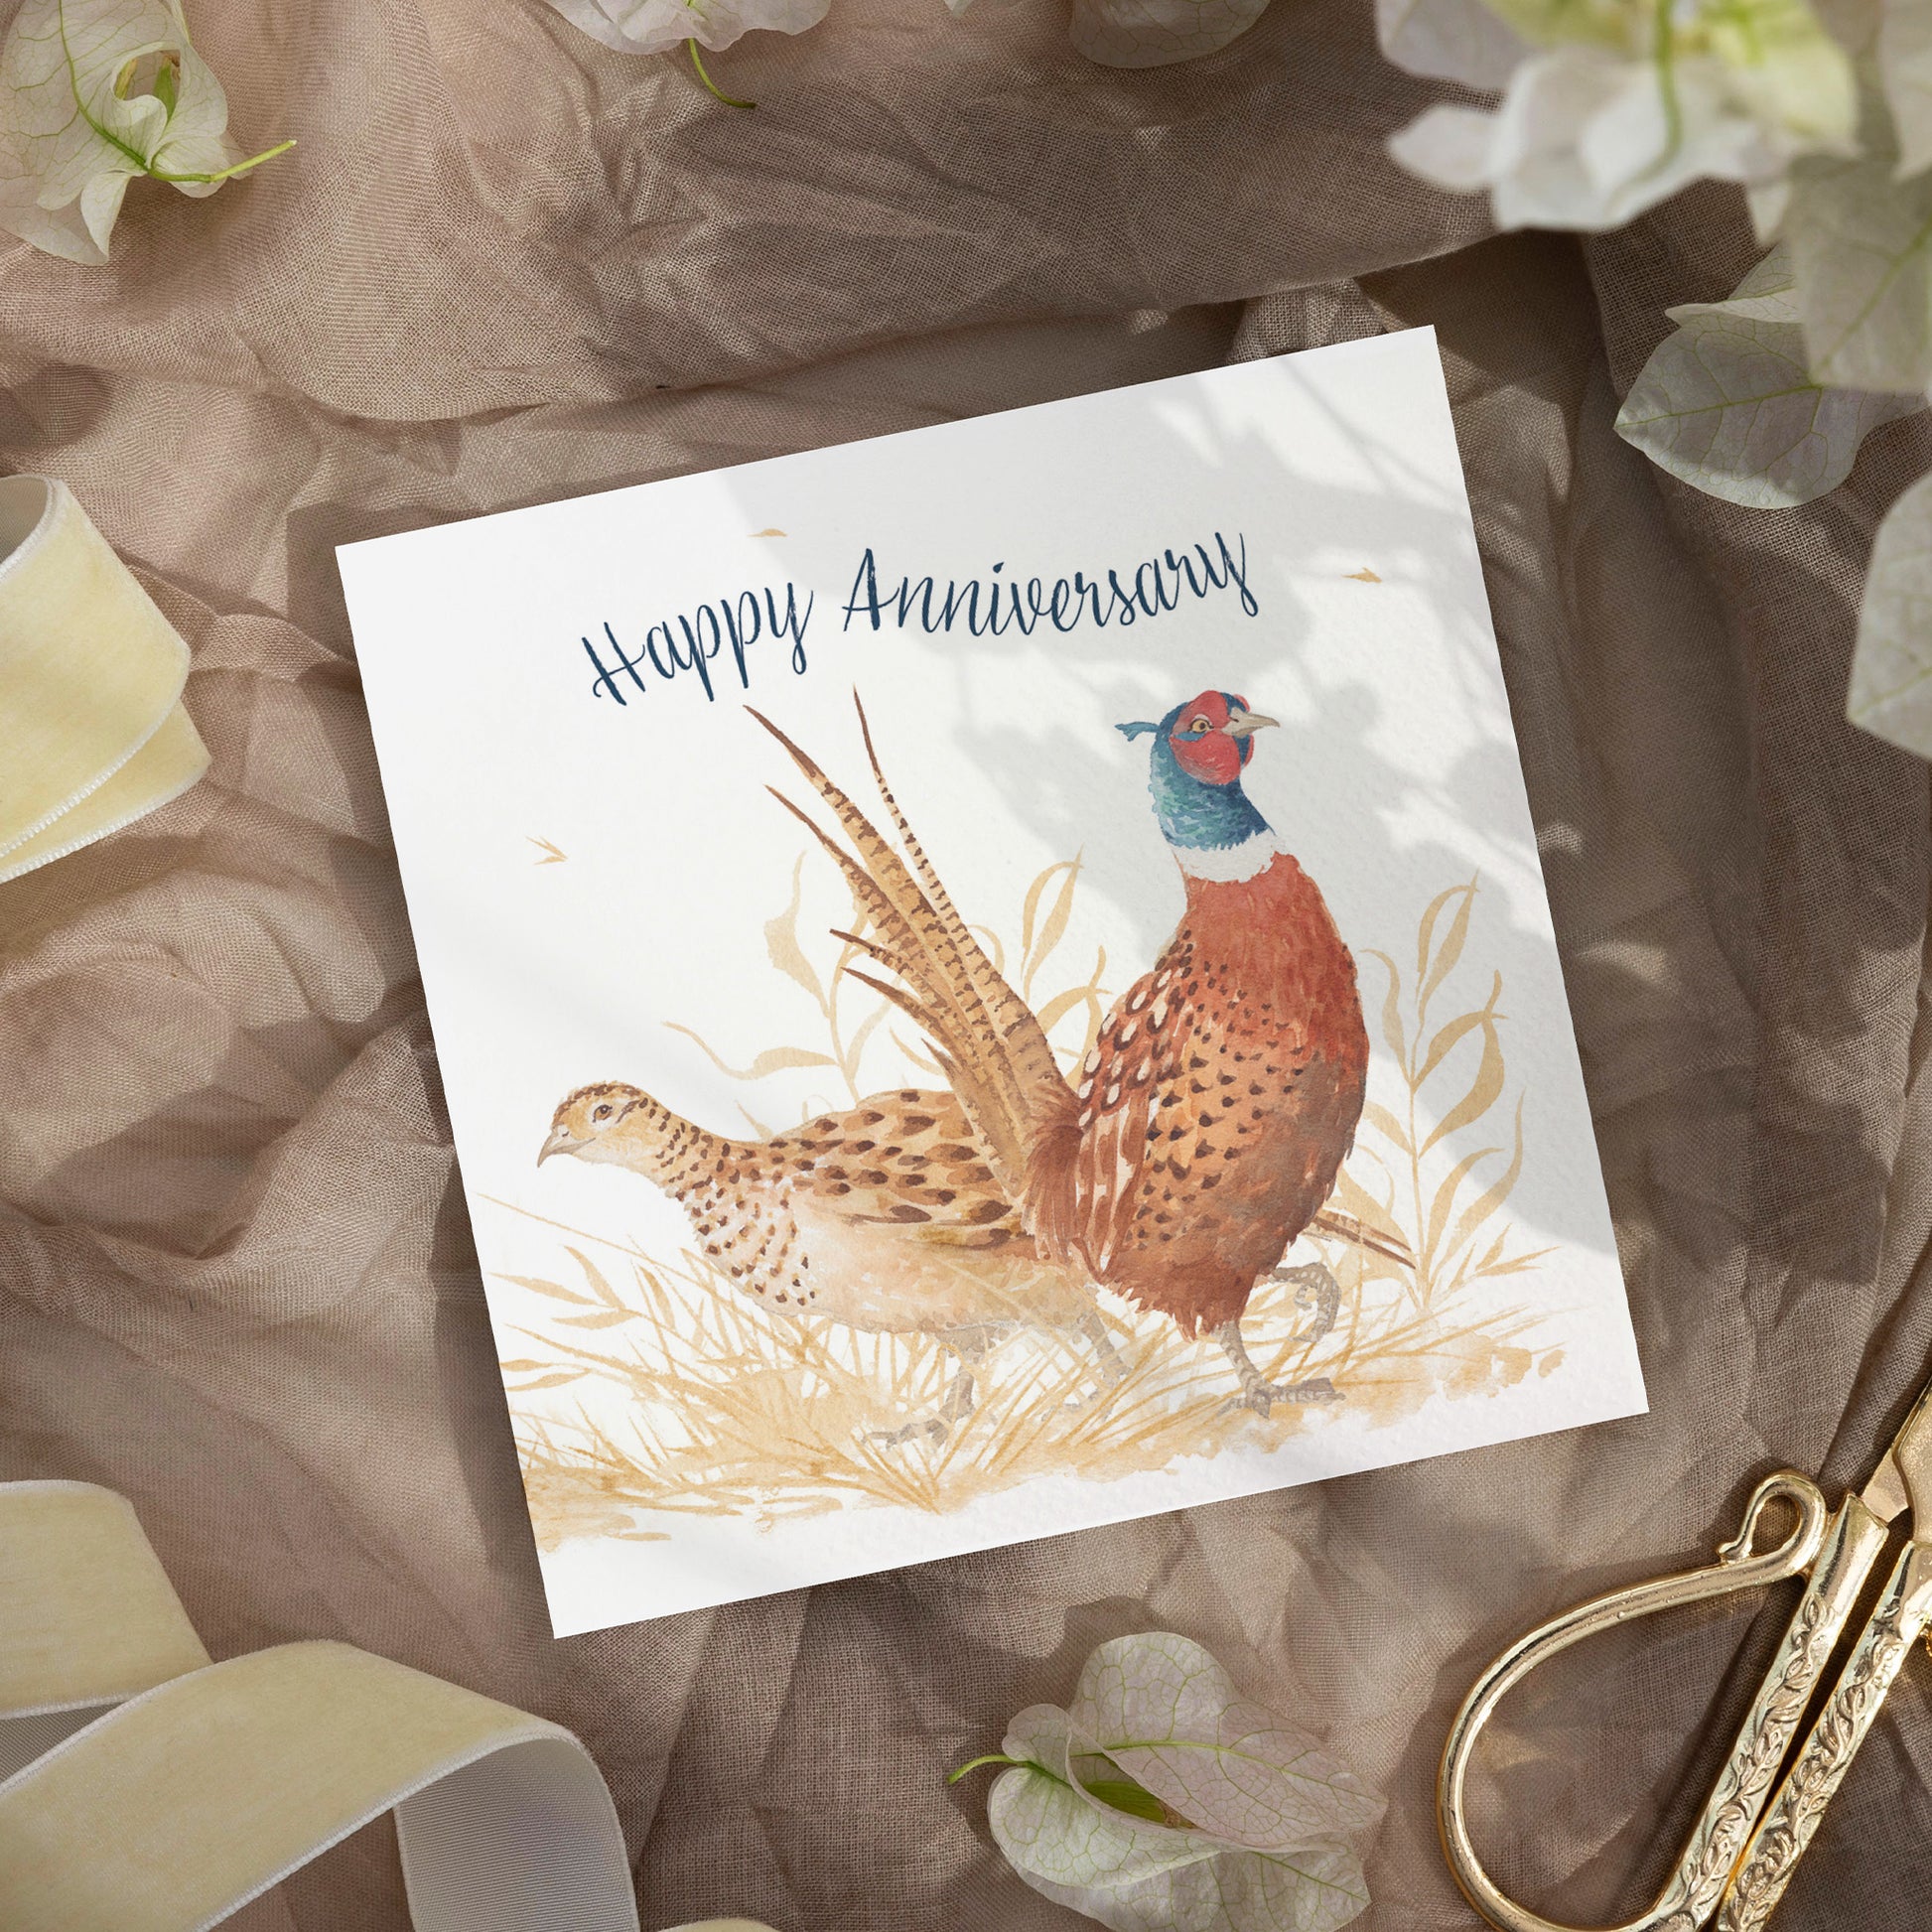 A greetings card laid flat on a table surrounded by gift wrapping items including scissors and ribbon. The card reads Happy Anniversary in dark blue text above a male and female pheasant couple in a watercolour style.